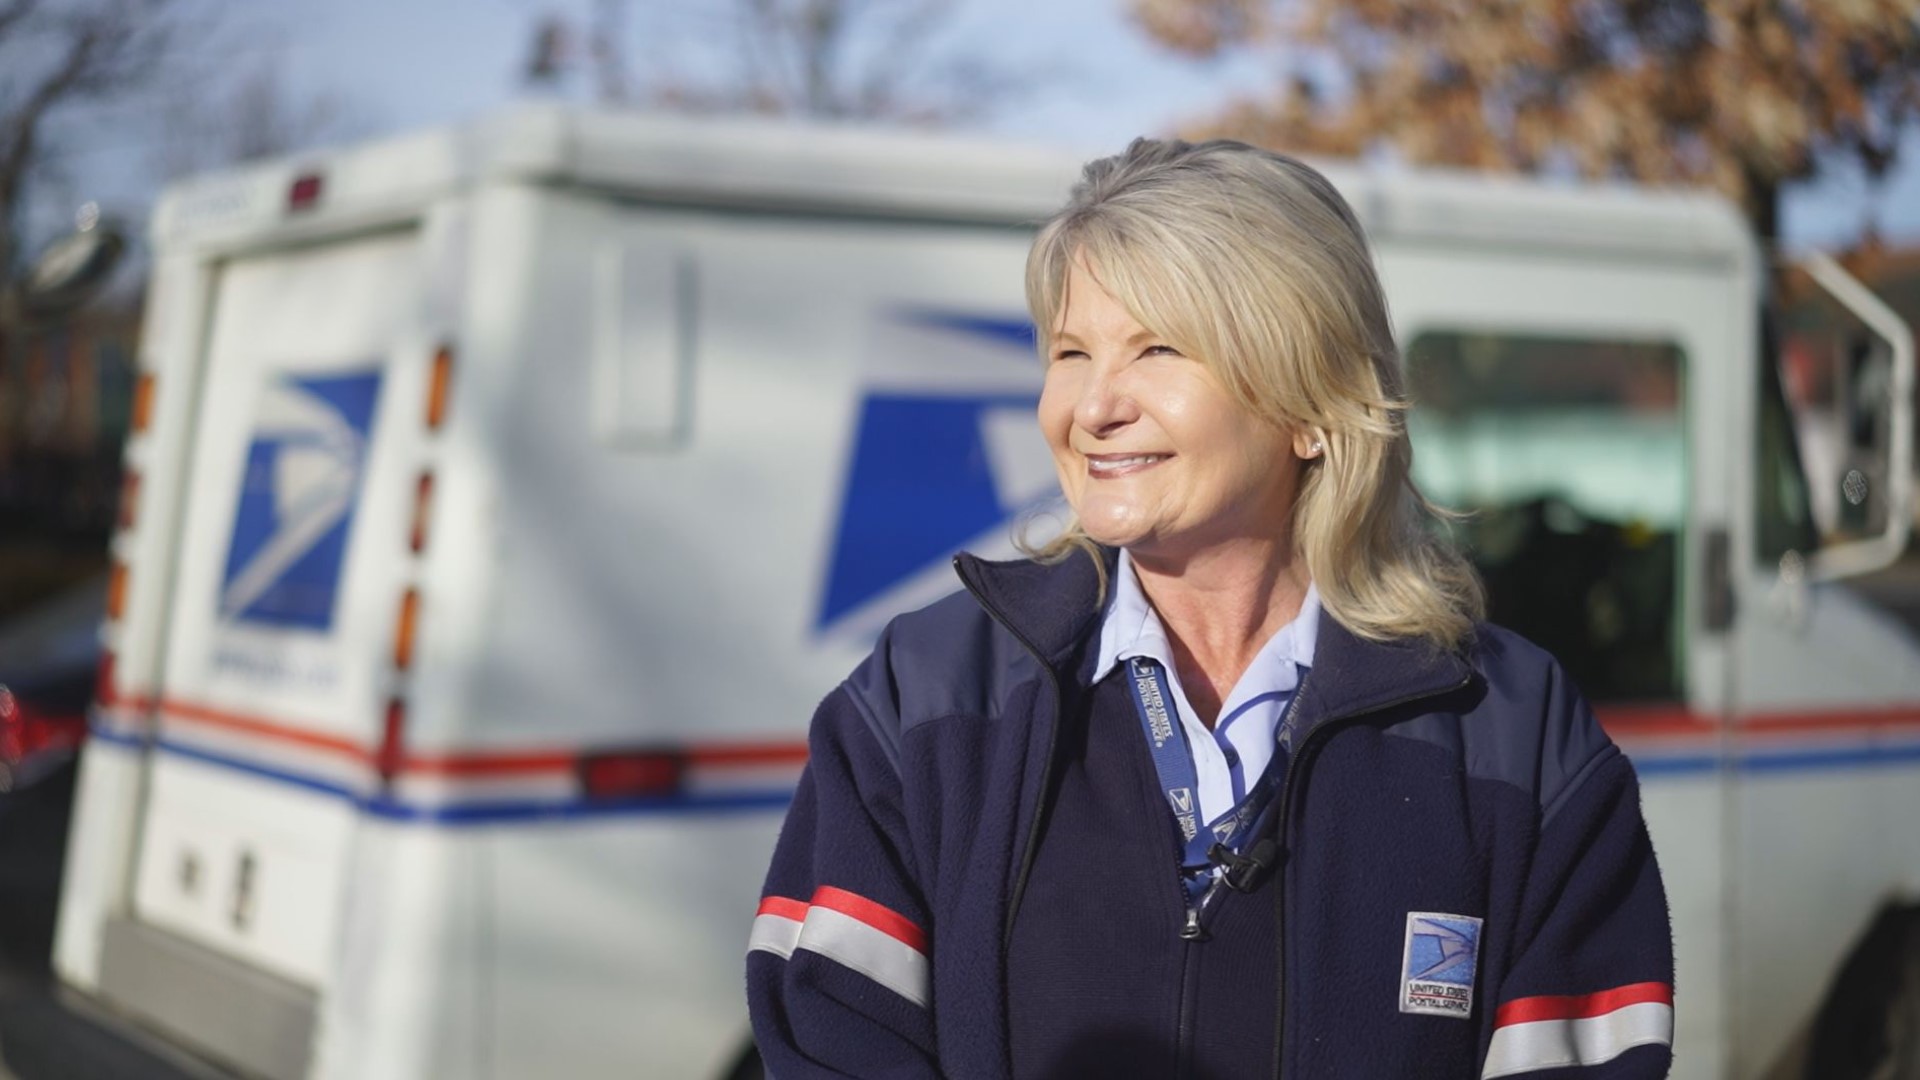 Holli Wood is a U.S. Postal Service letter carrier who uses lip reading and sign language to communicate with customers.